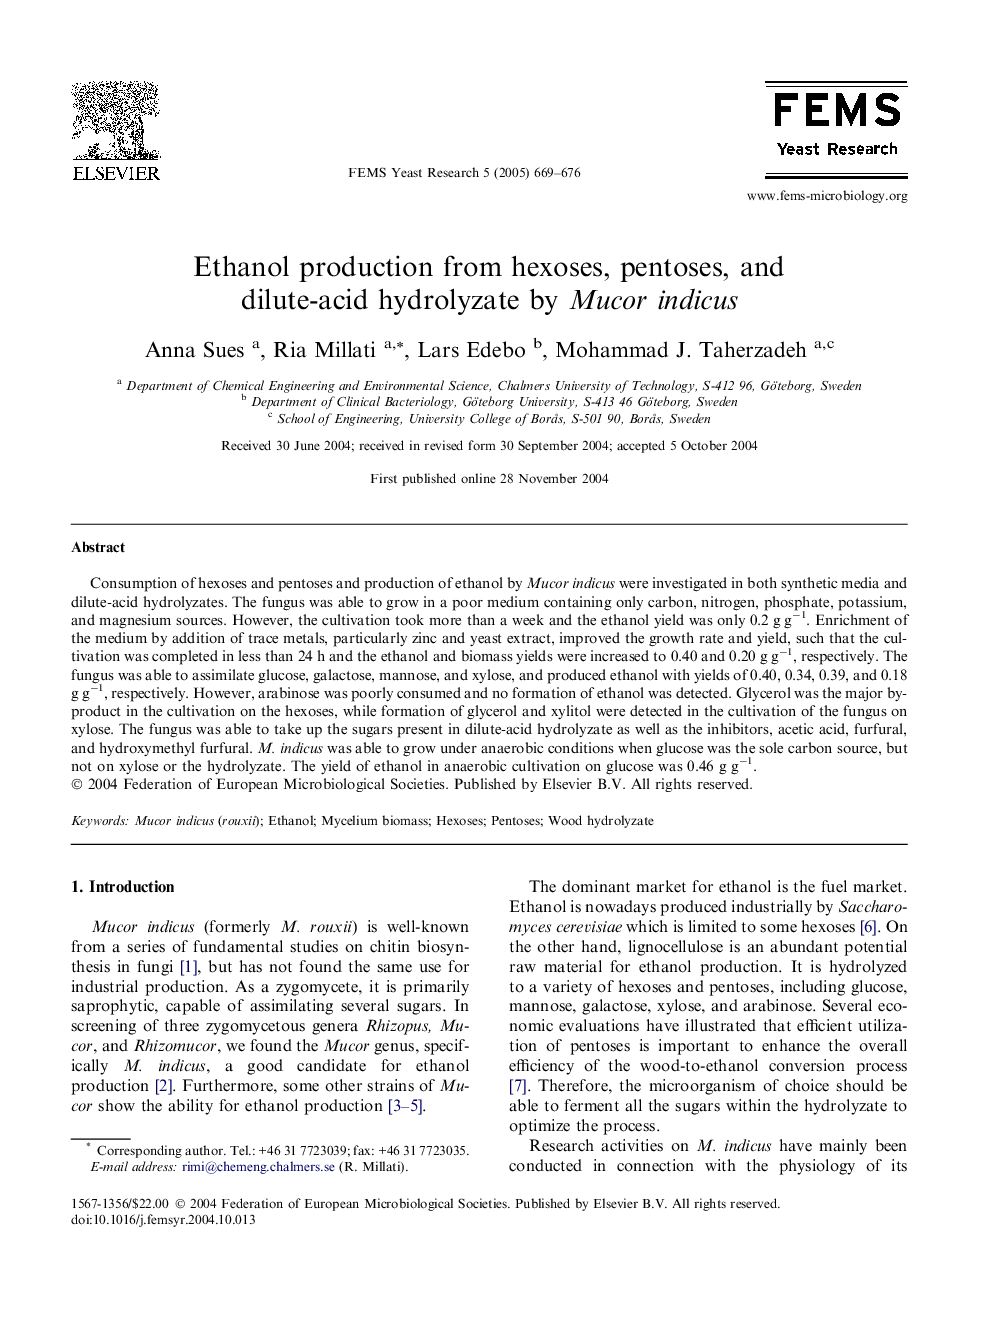 Ethanol production from hexoses, pentoses, and dilute-acid hydrolyzate by Mucor indicus